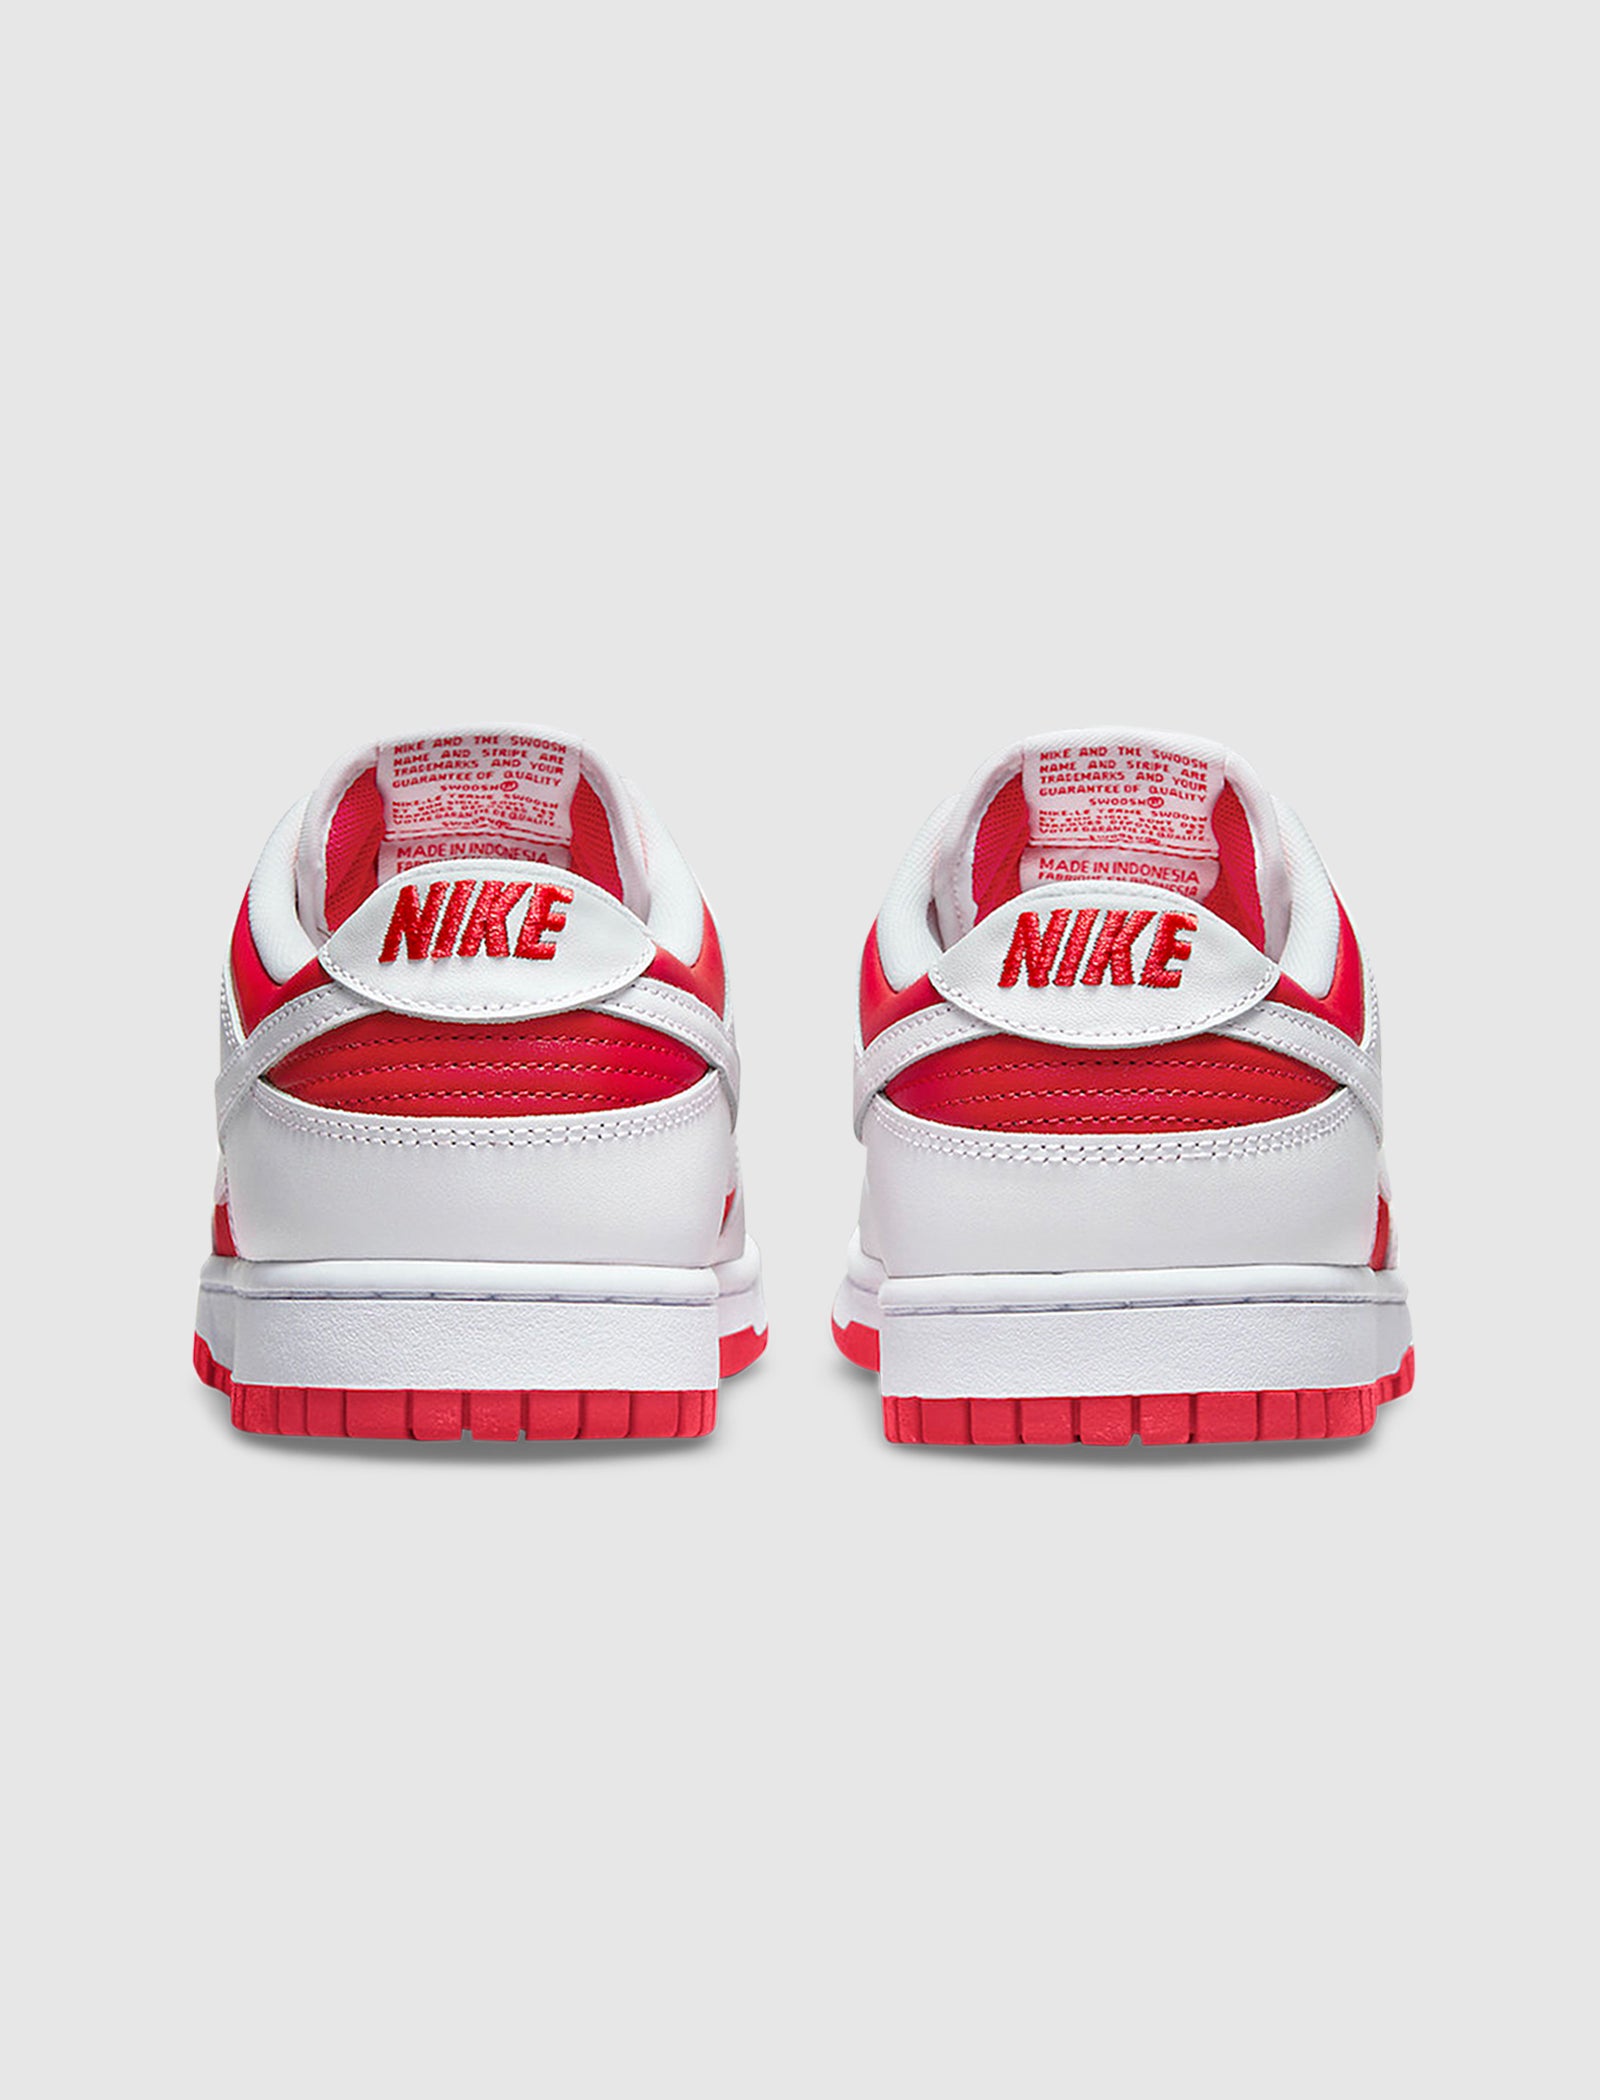 DUNK LOW "UNIVERSITY RED"